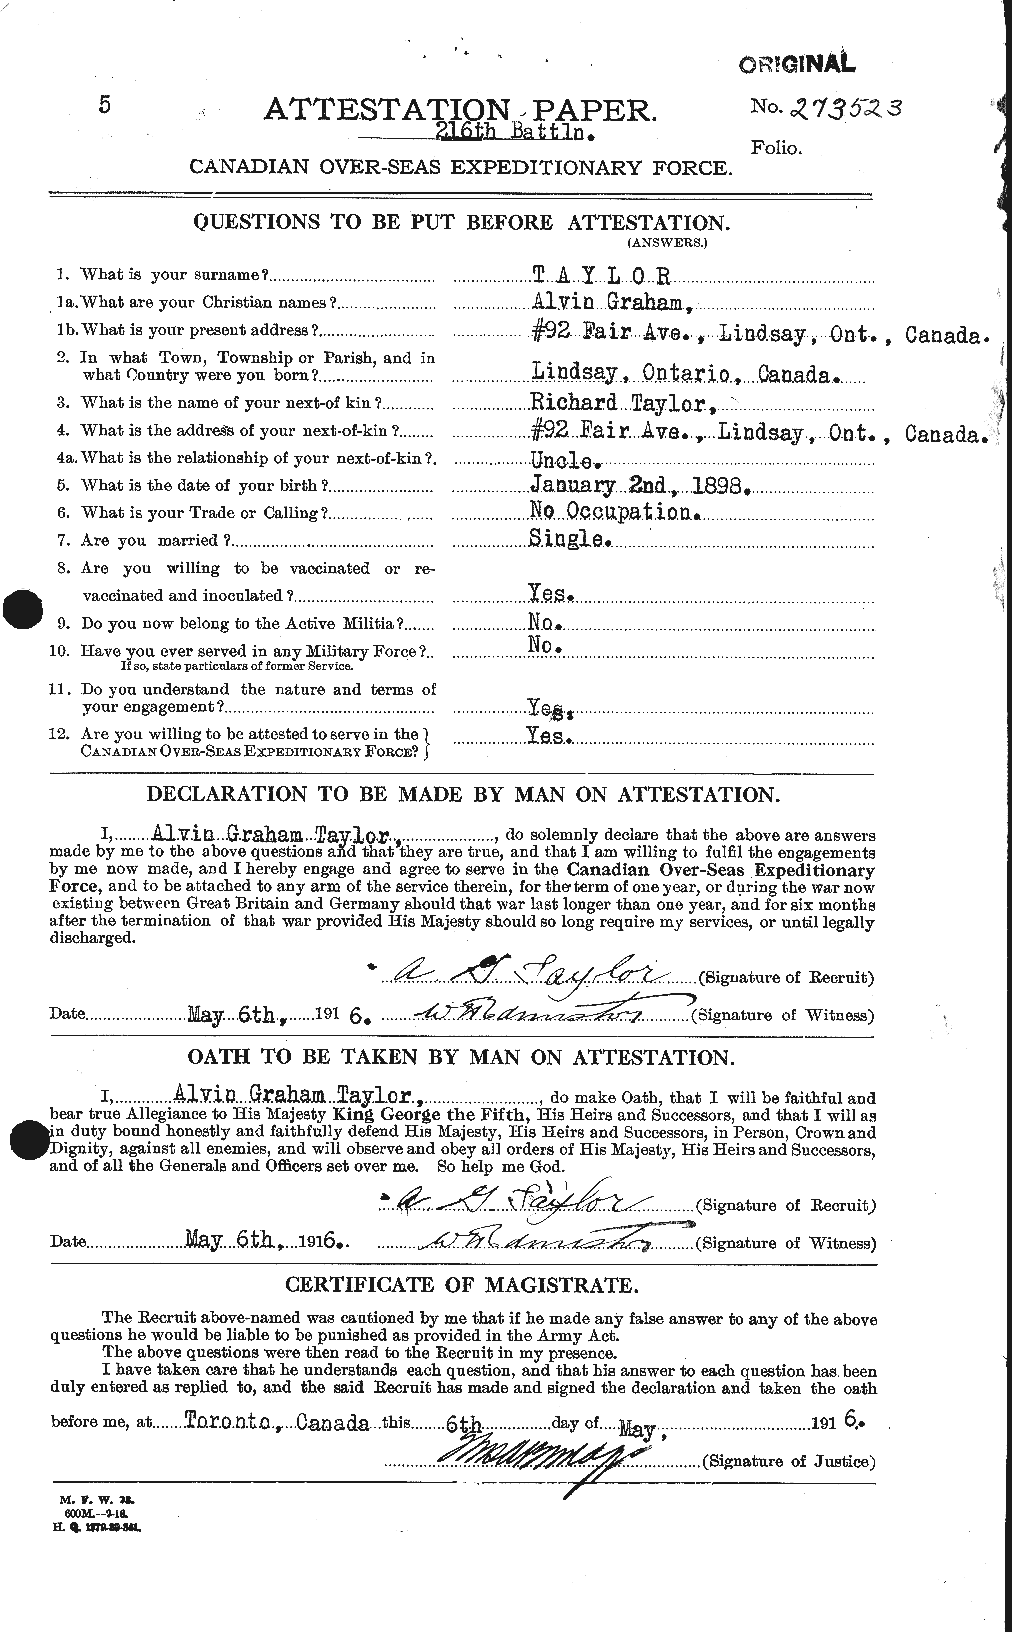 Personnel Records of the First World War - CEF 626214a